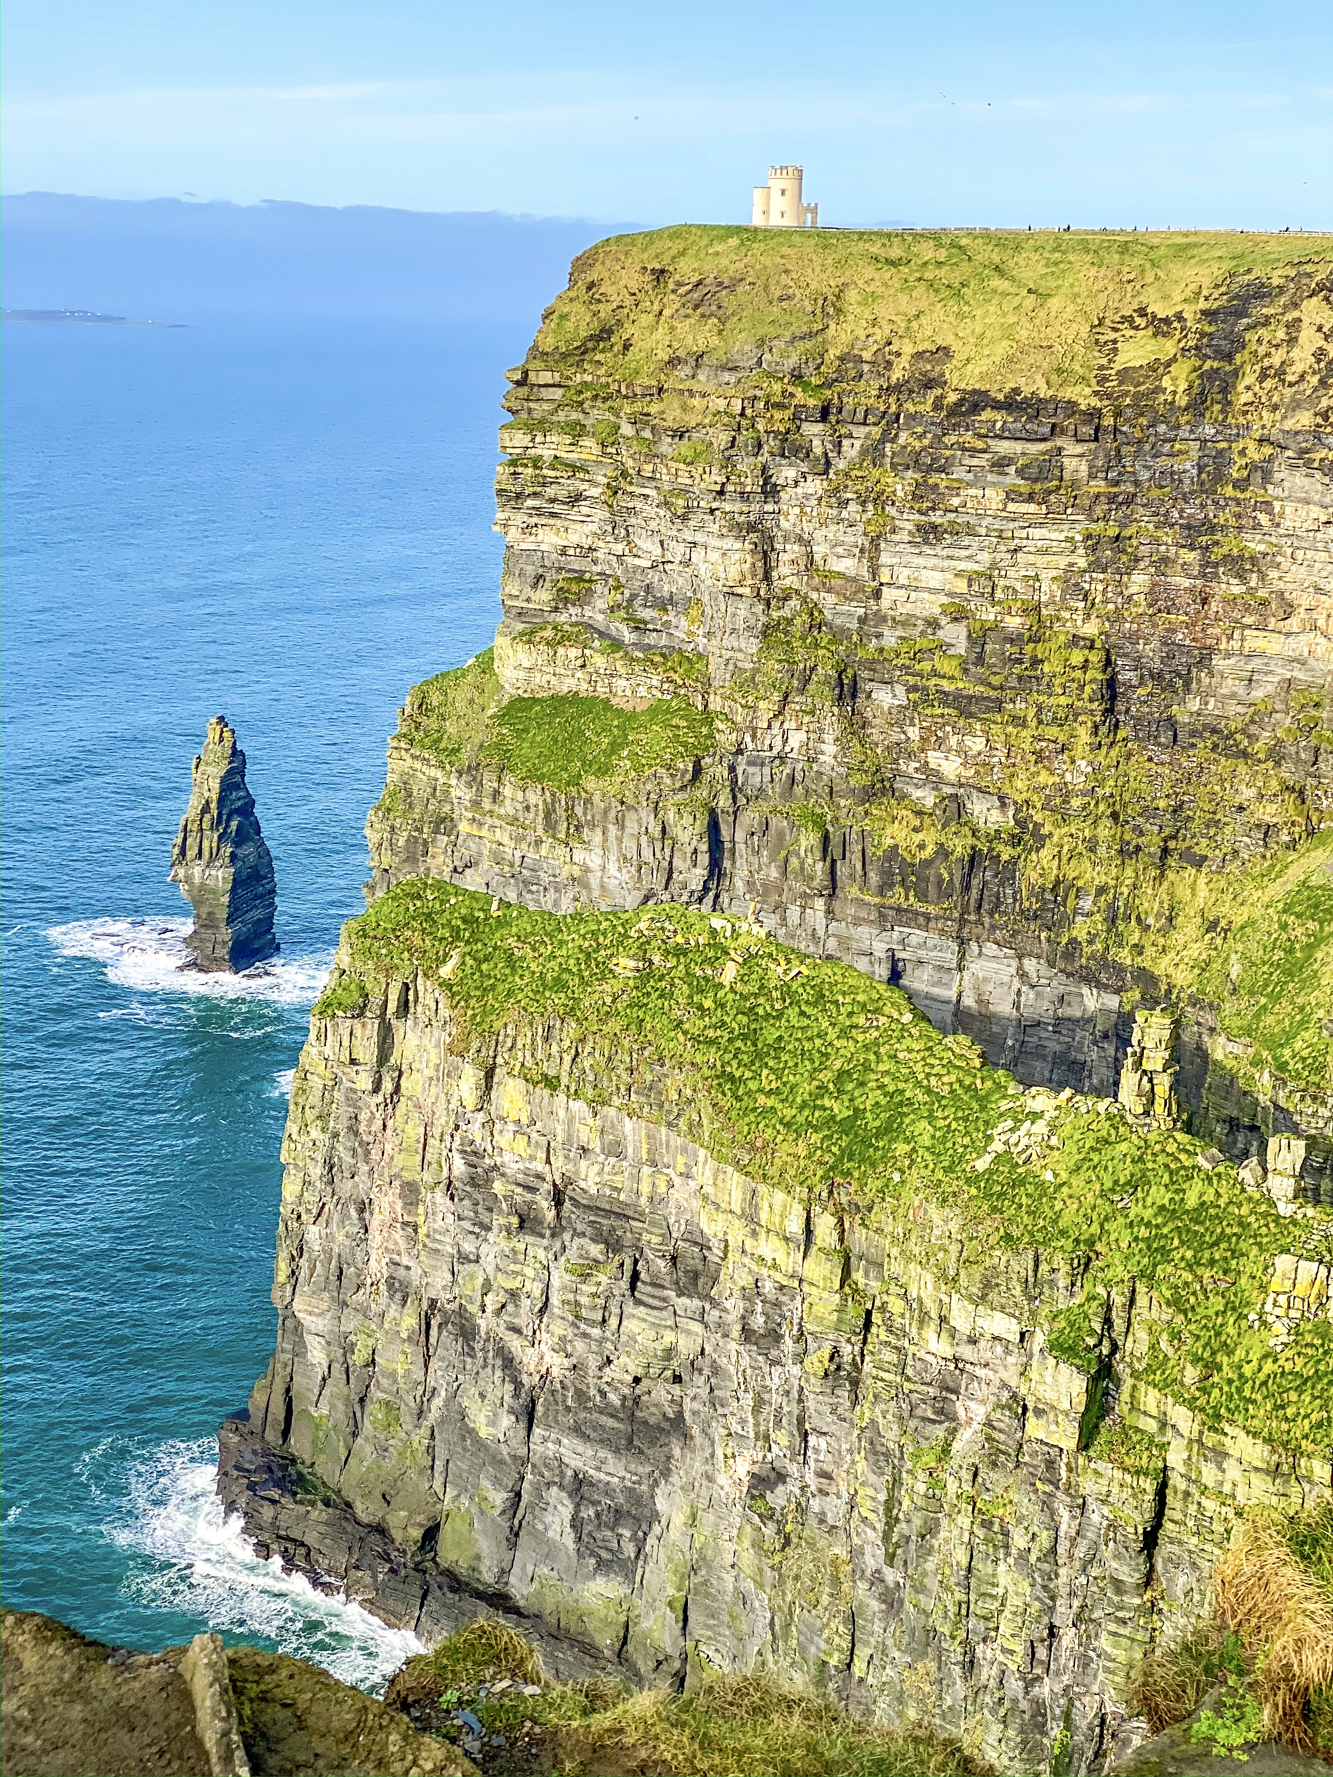 Where to eat, play and stay in Ireland with the help of our Ireland Travel Guide! Full of helpful tips and info on Cliffs of Moher, and more.